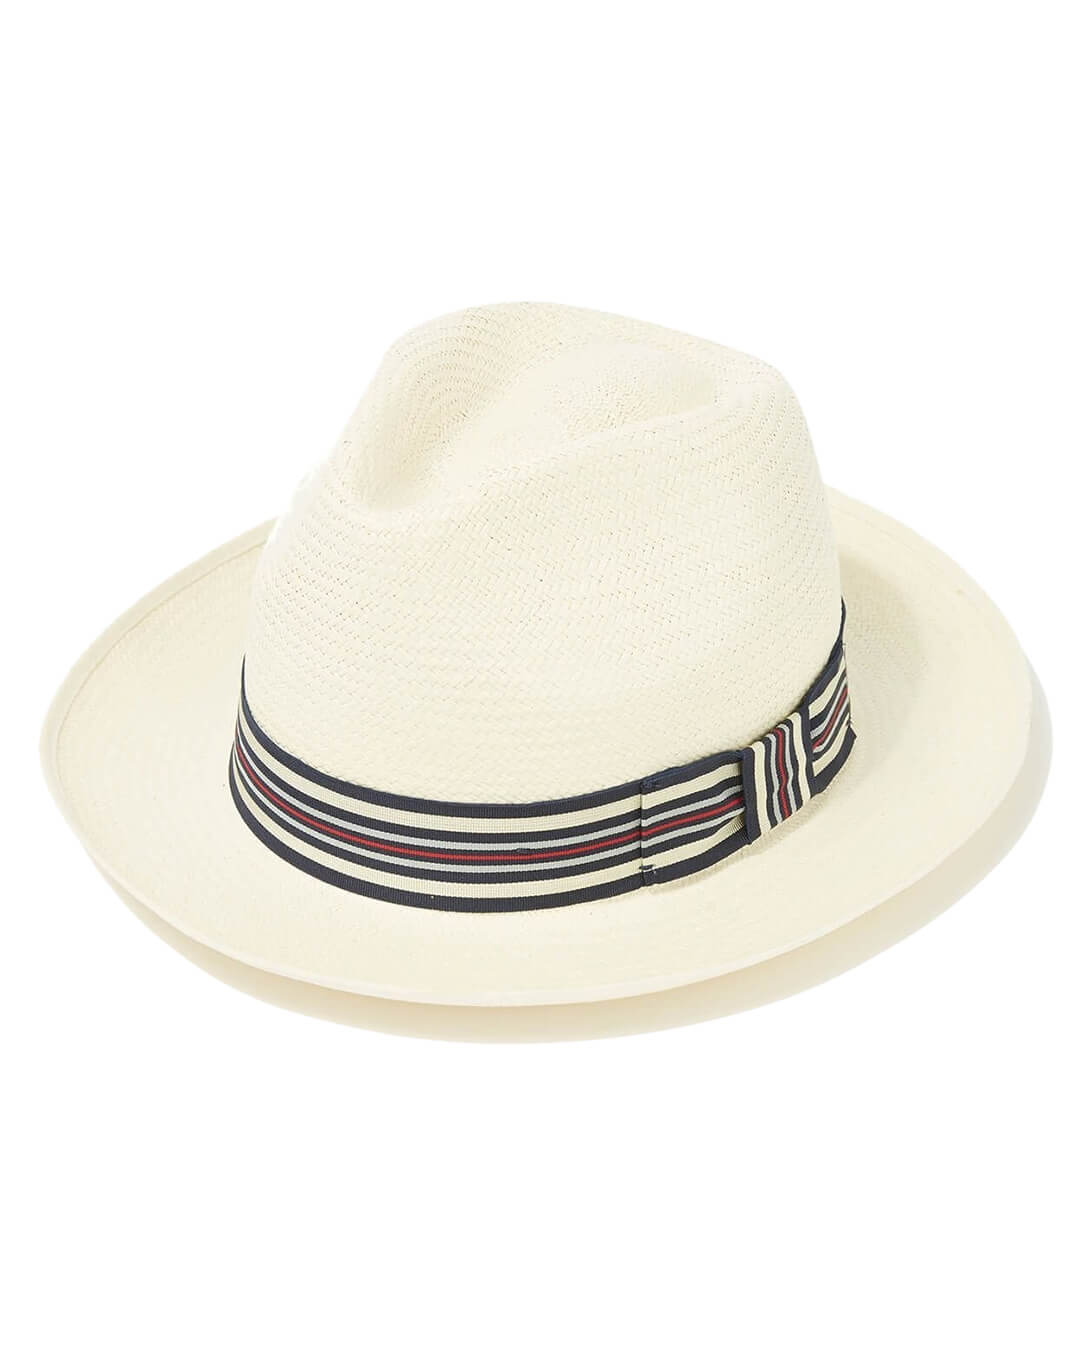 Chrysty Hats Chrystys Classic Preset Panama Hat With Regimental Band And Cream Binding